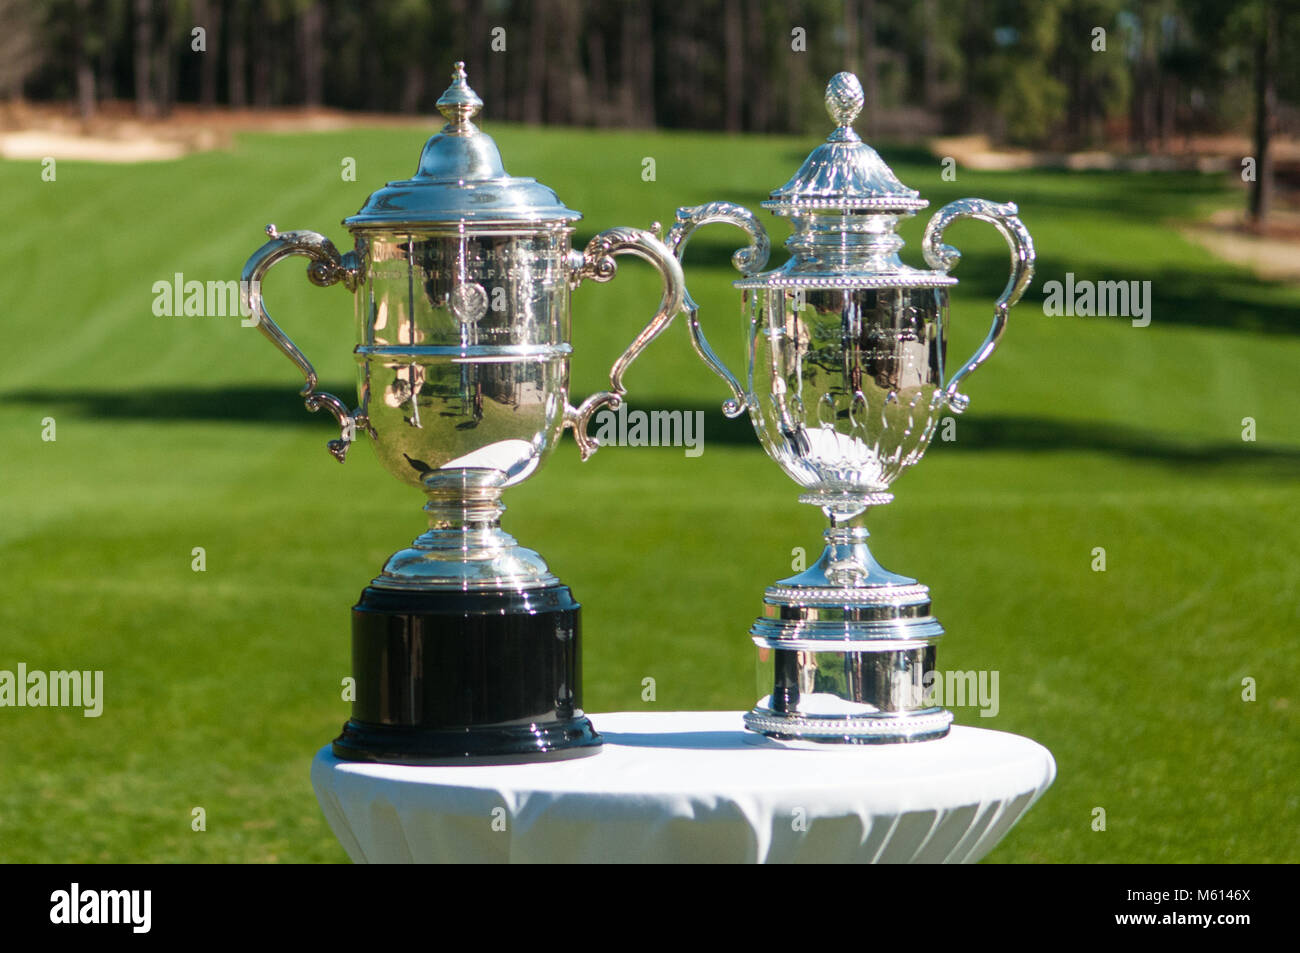 Southern Pines, North Carolina, USA. 27th Feb, 2018. Feb. 27, 2018 - SOUTHERN PINES, N.C., USA - The trophies for the 2022 U.S. Women's Open and the 2019 2nd U.S. Senior Women's Open Championship were on display during a media availability at Pine Needles Lodge & Golf Club. The 2019 U.S. Senior Women's Open Championship will be held May 16-19, 2019. It was also announced that Pine Needles will also host the 2022 U.S. Women's Open, June 2-5. The 2019 event will mark the club's sixth USGA championship, the fourth U.S. Women's Open, and the first since the 2007 U.S. Women's Open won by Cris Stock Photo